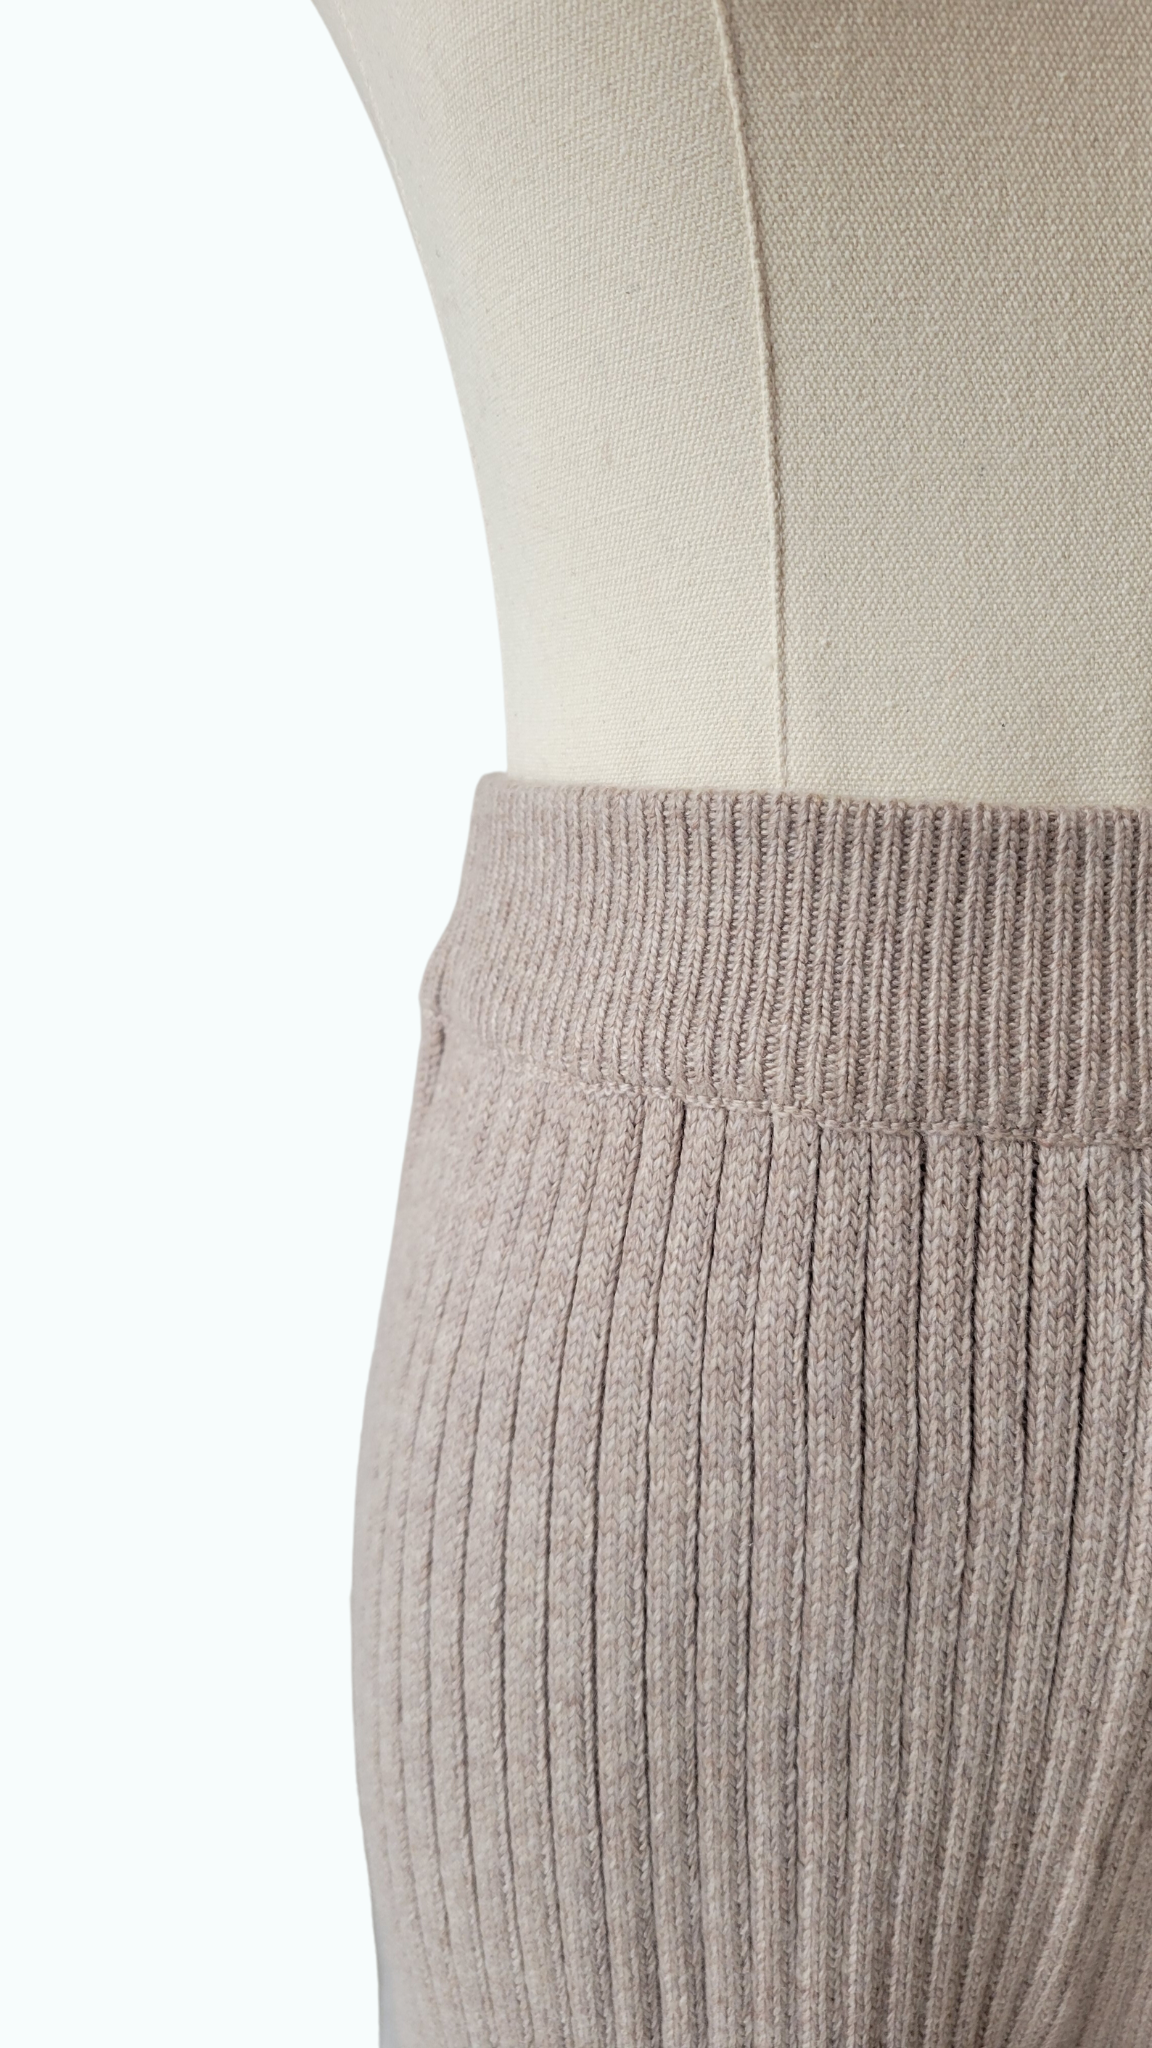 A chic two-piece knit co-ord set in 'Wheat', a beige colour. The set includes a comfy sweater with a relaxed fit and matching knit pants. Perfect for a stylish and cozy look.